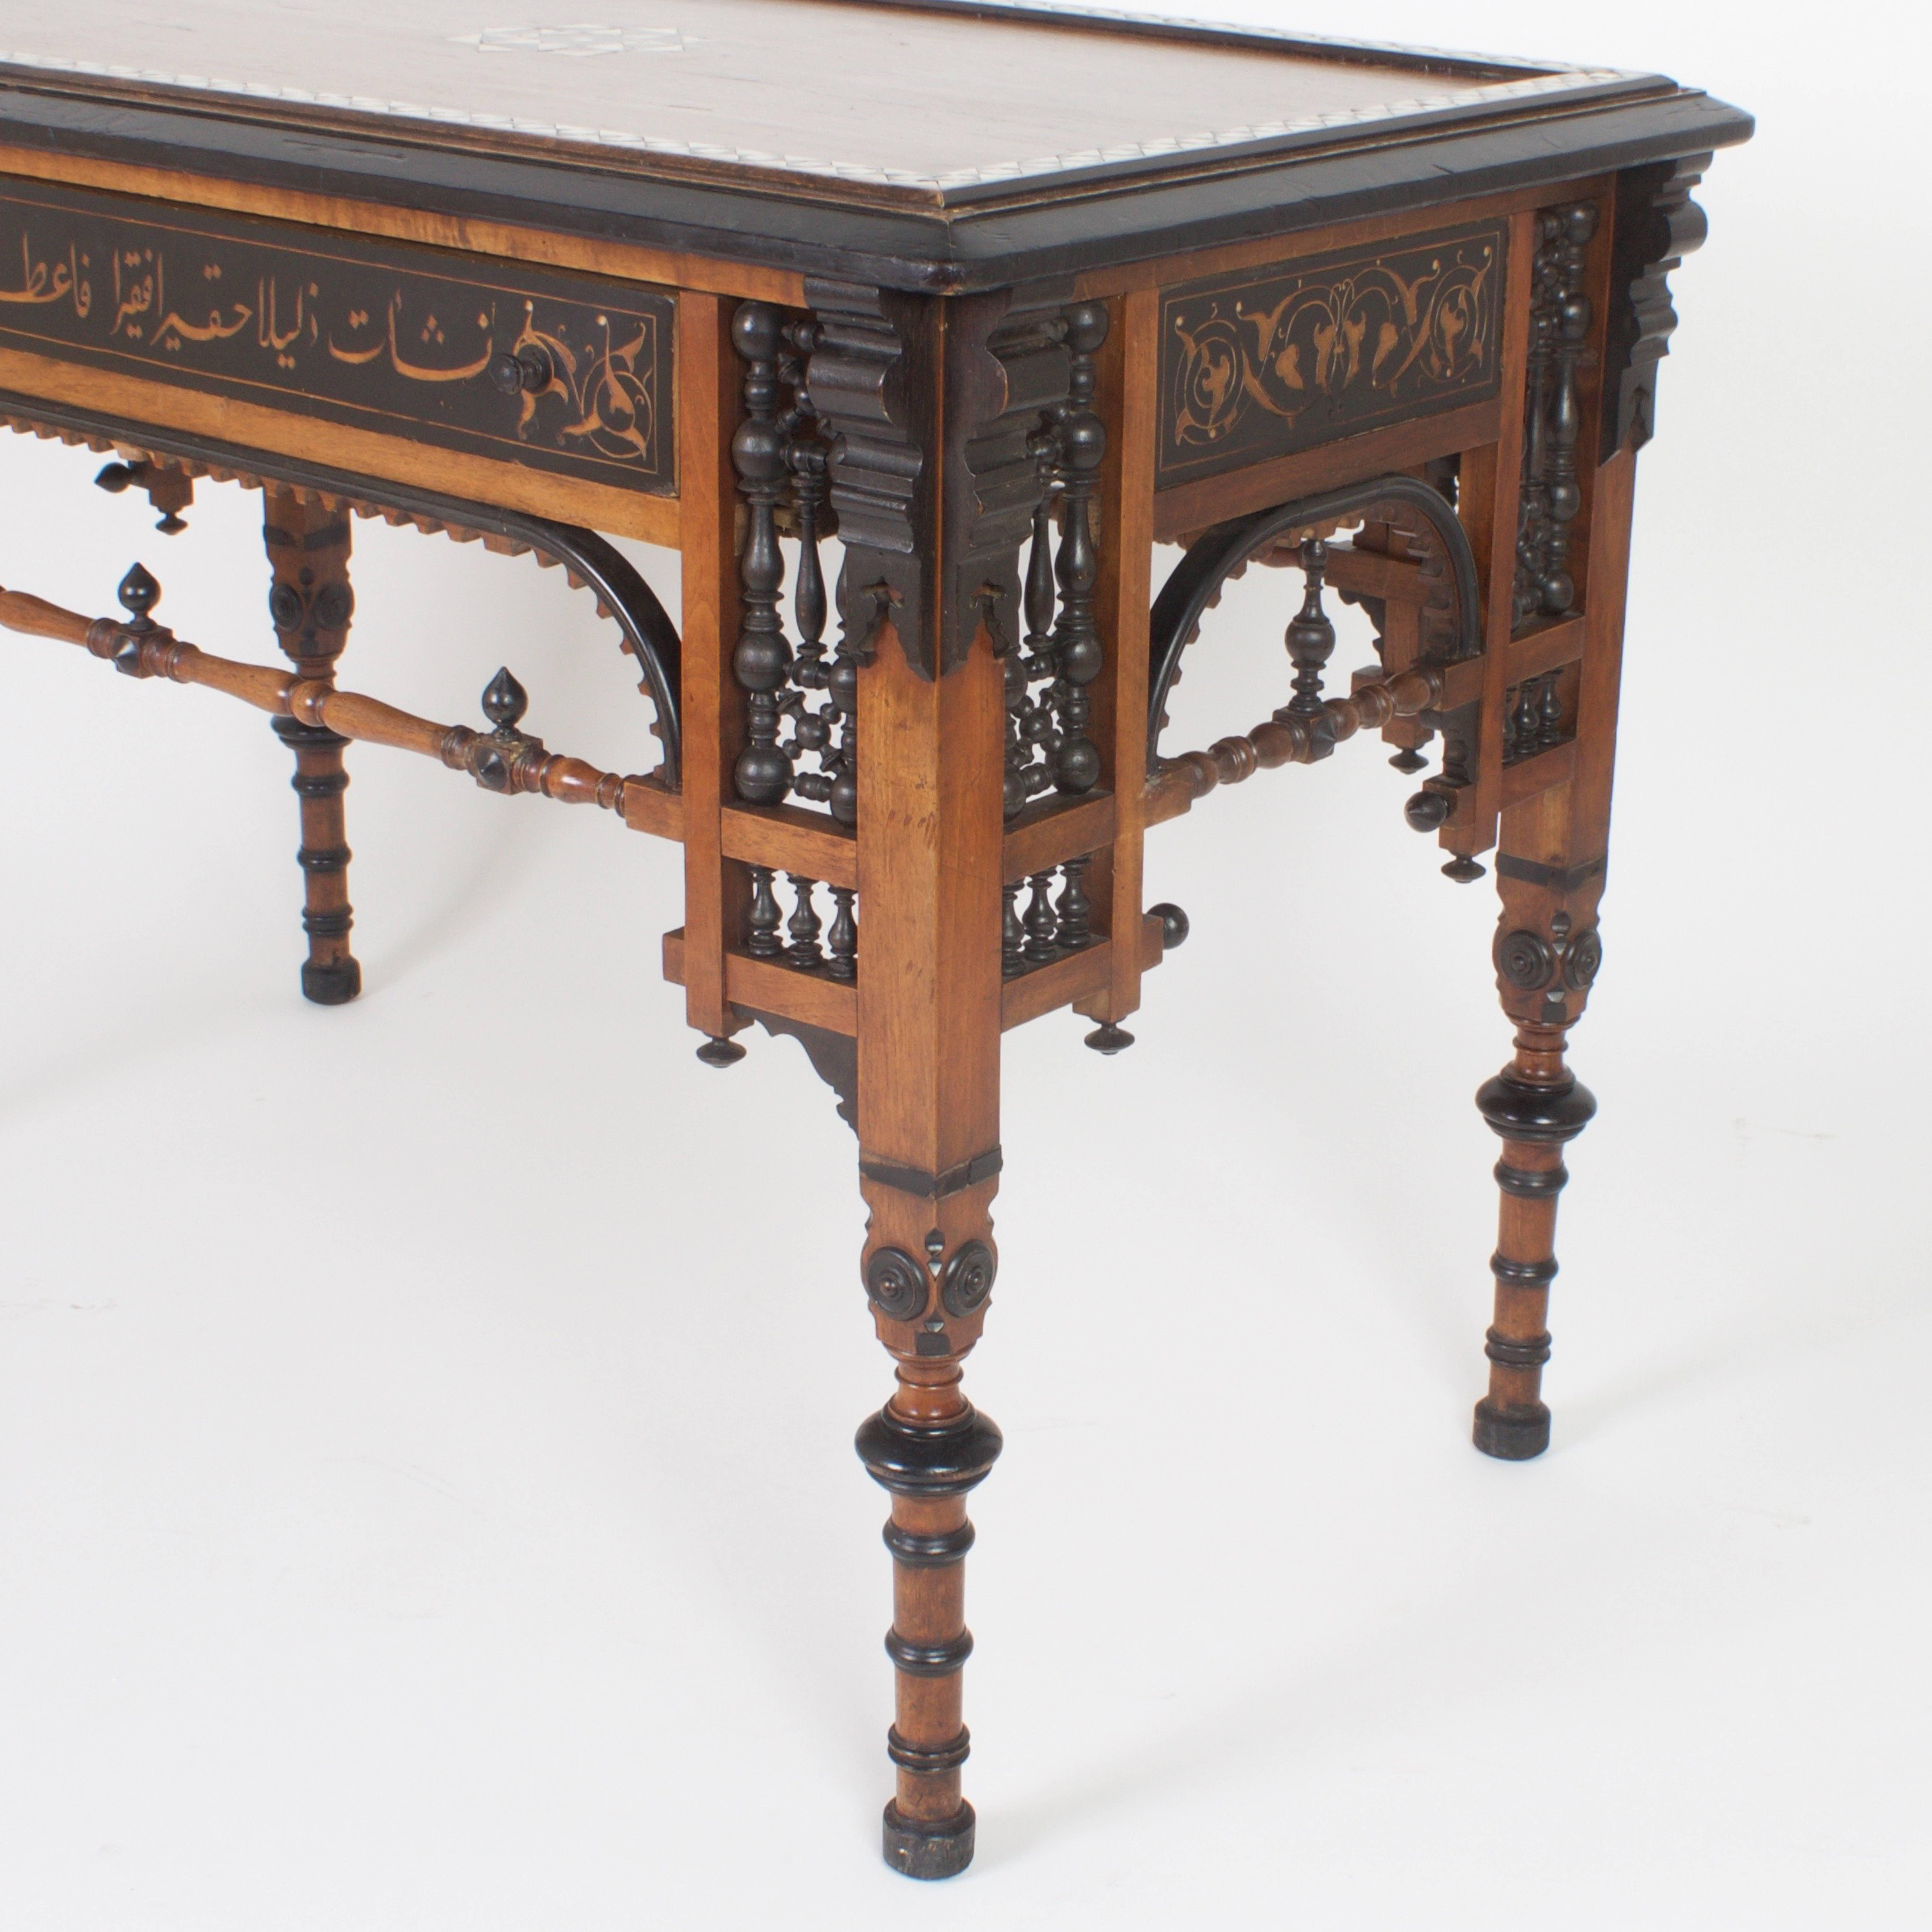 French 19th Century Exotic Aesthetic Movement Writing Desk or Table